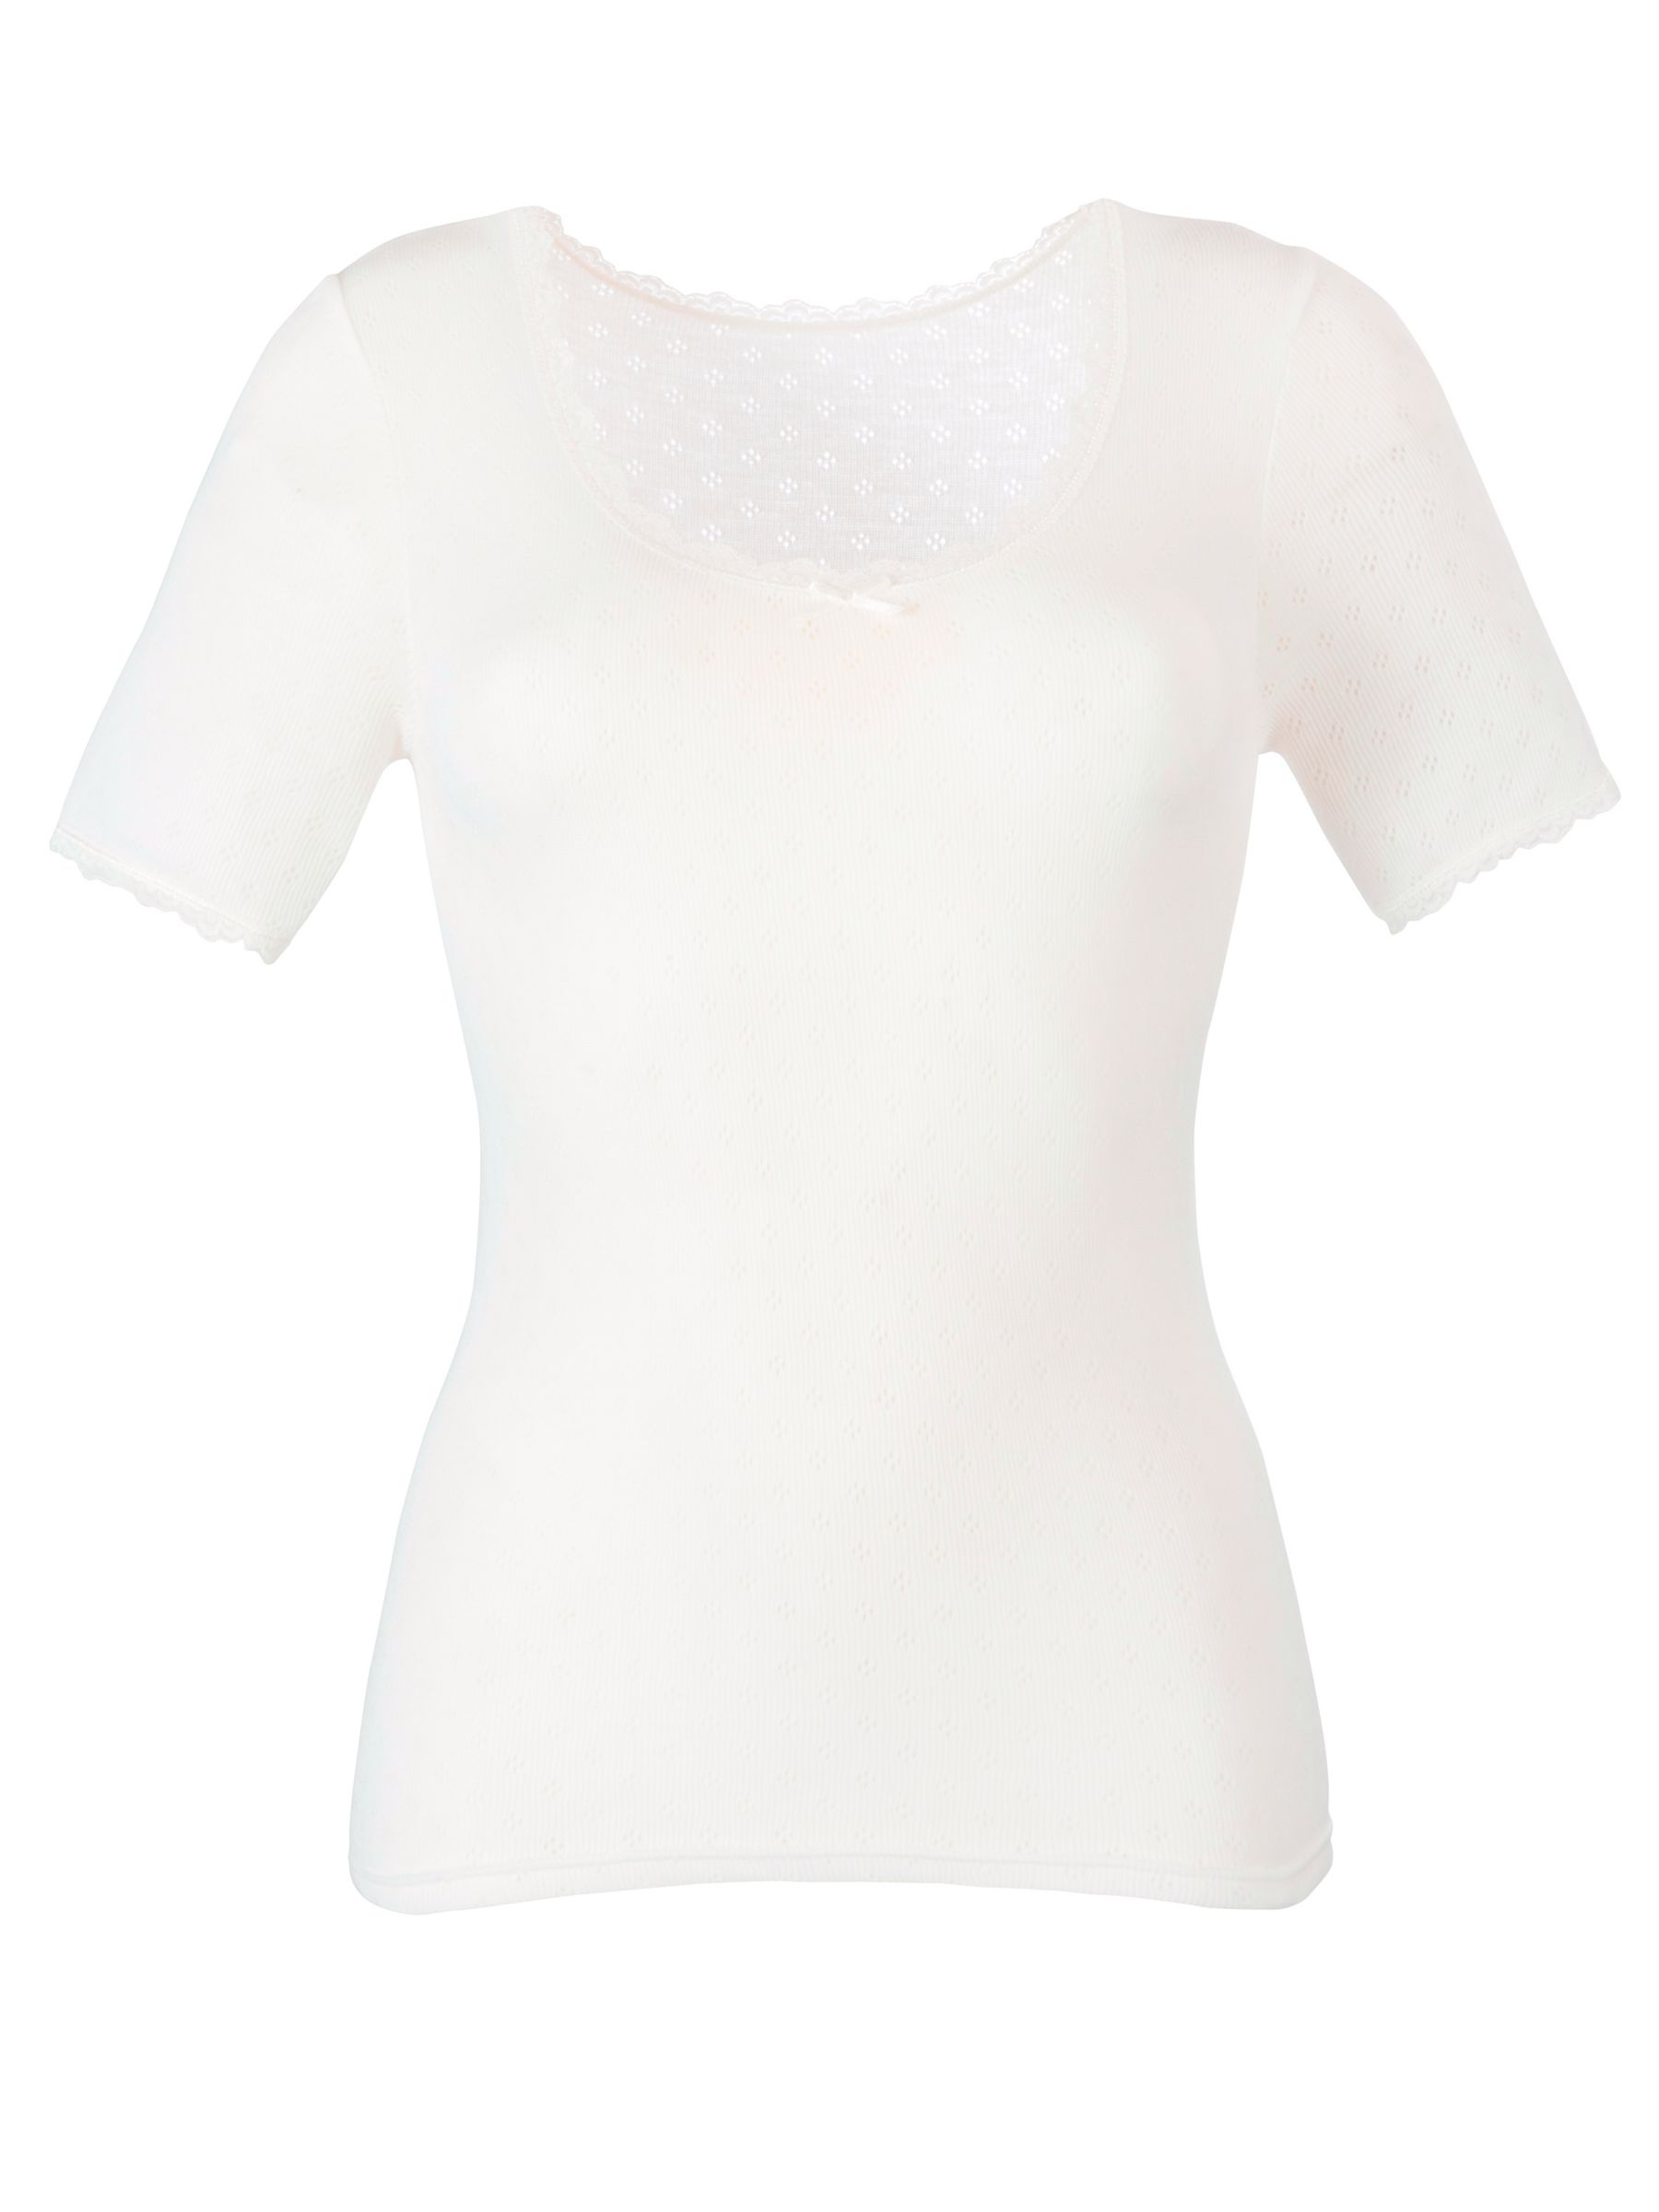 Thermal T-Shirt, Ivory